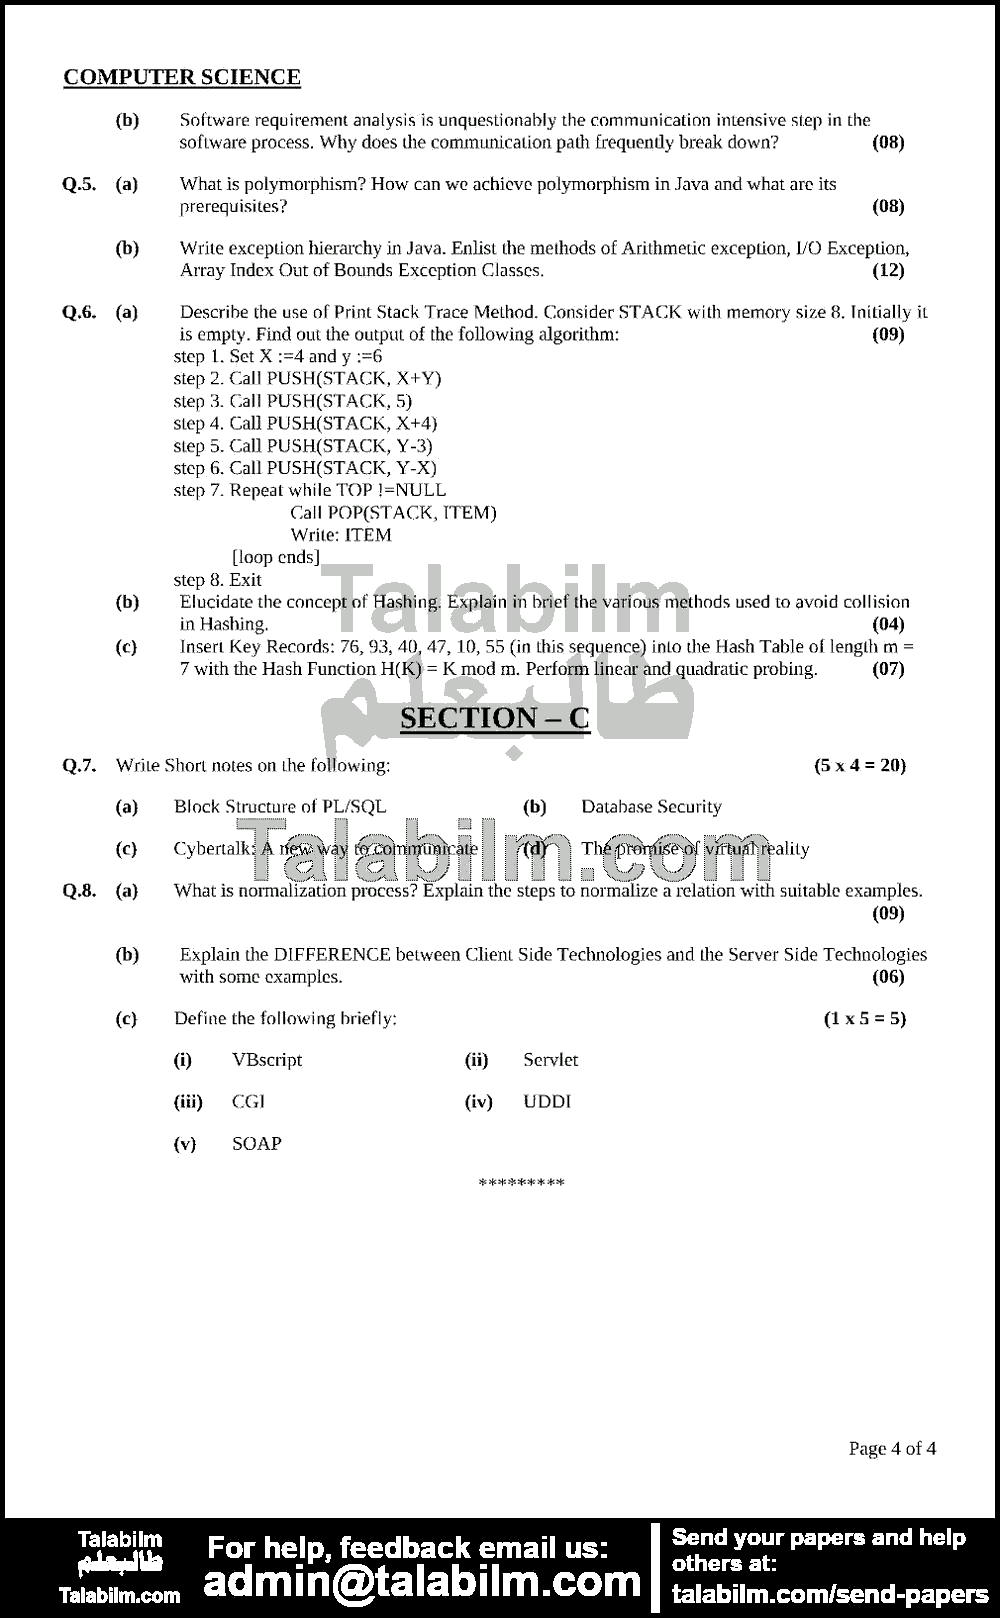 Computer Science 0 past paper for 2011 Page No. 4